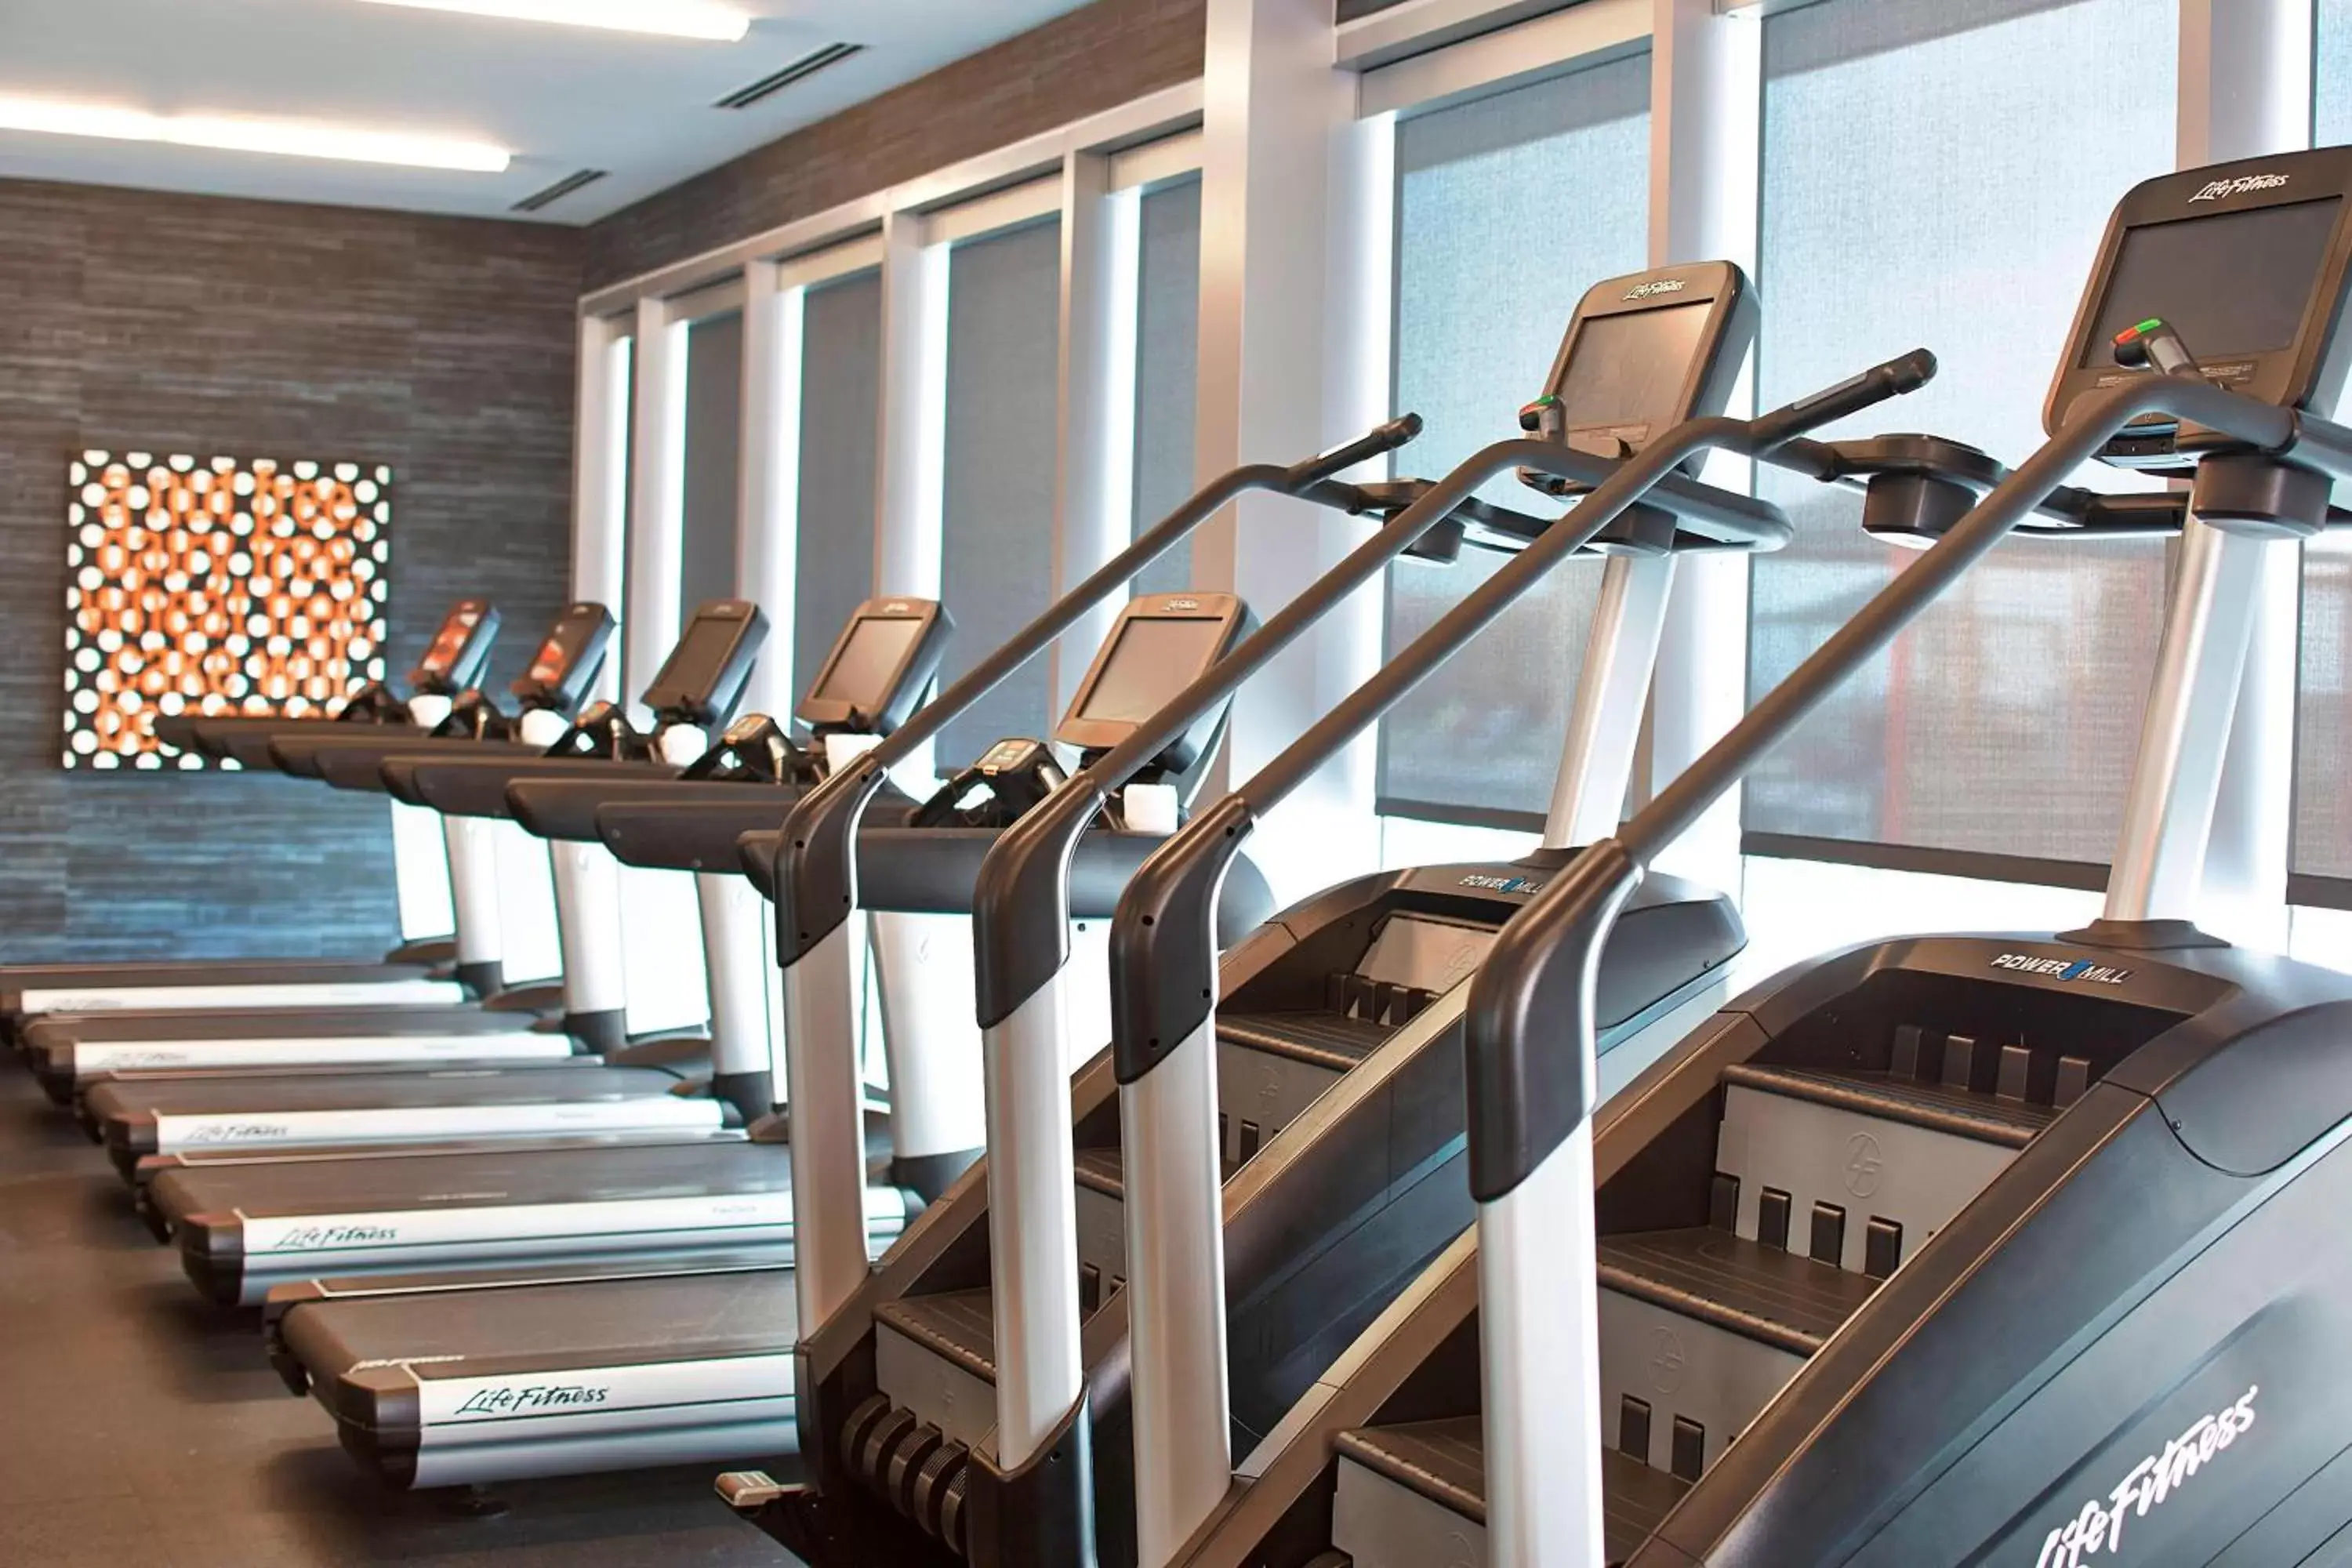 Fitness centre/facilities, Fitness Center/Facilities in Renaissance Dallas at Plano Legacy West Hotel